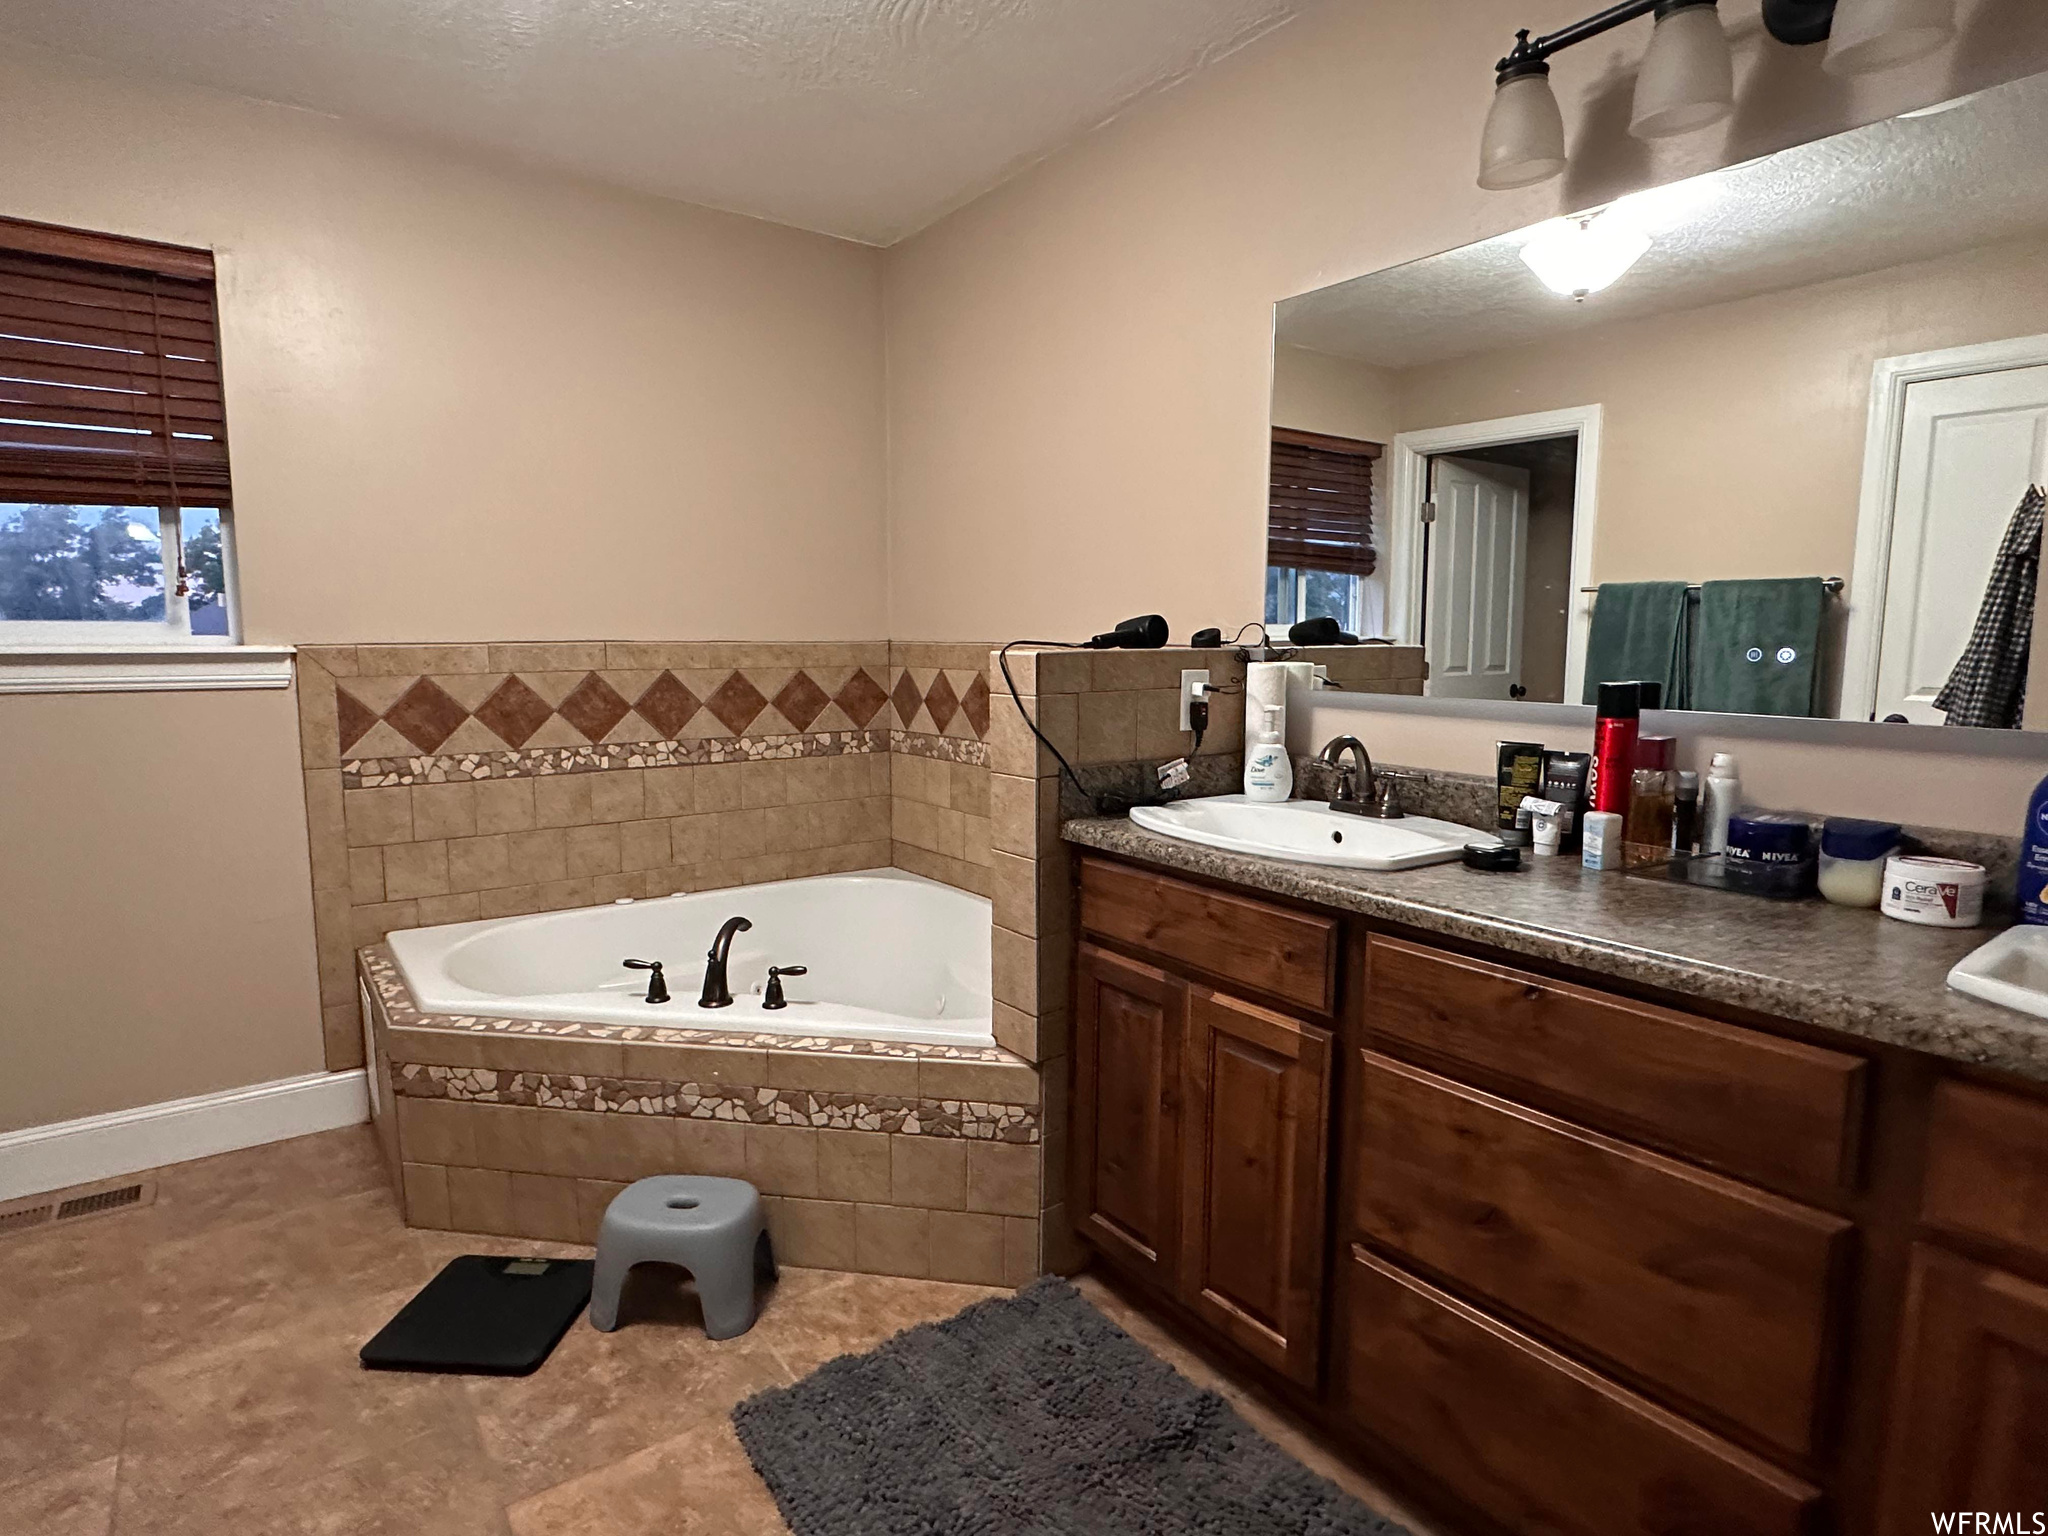 Bathroom featuring tile floors, tiled tub, and vanity with extensive cabinet space